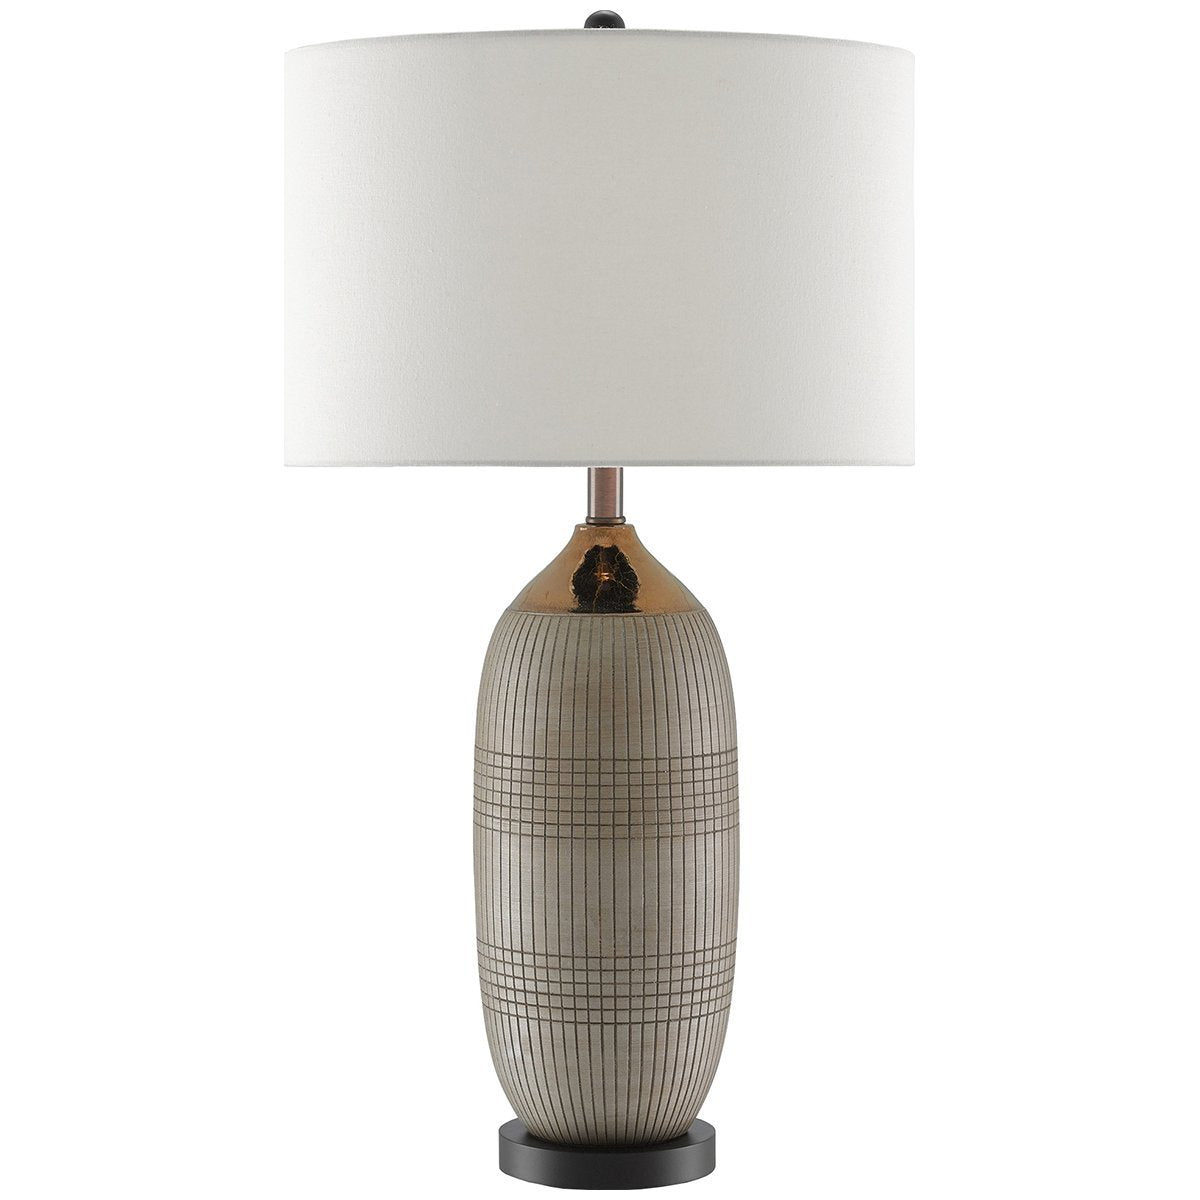 Currey and Company Alexander Table Lamp